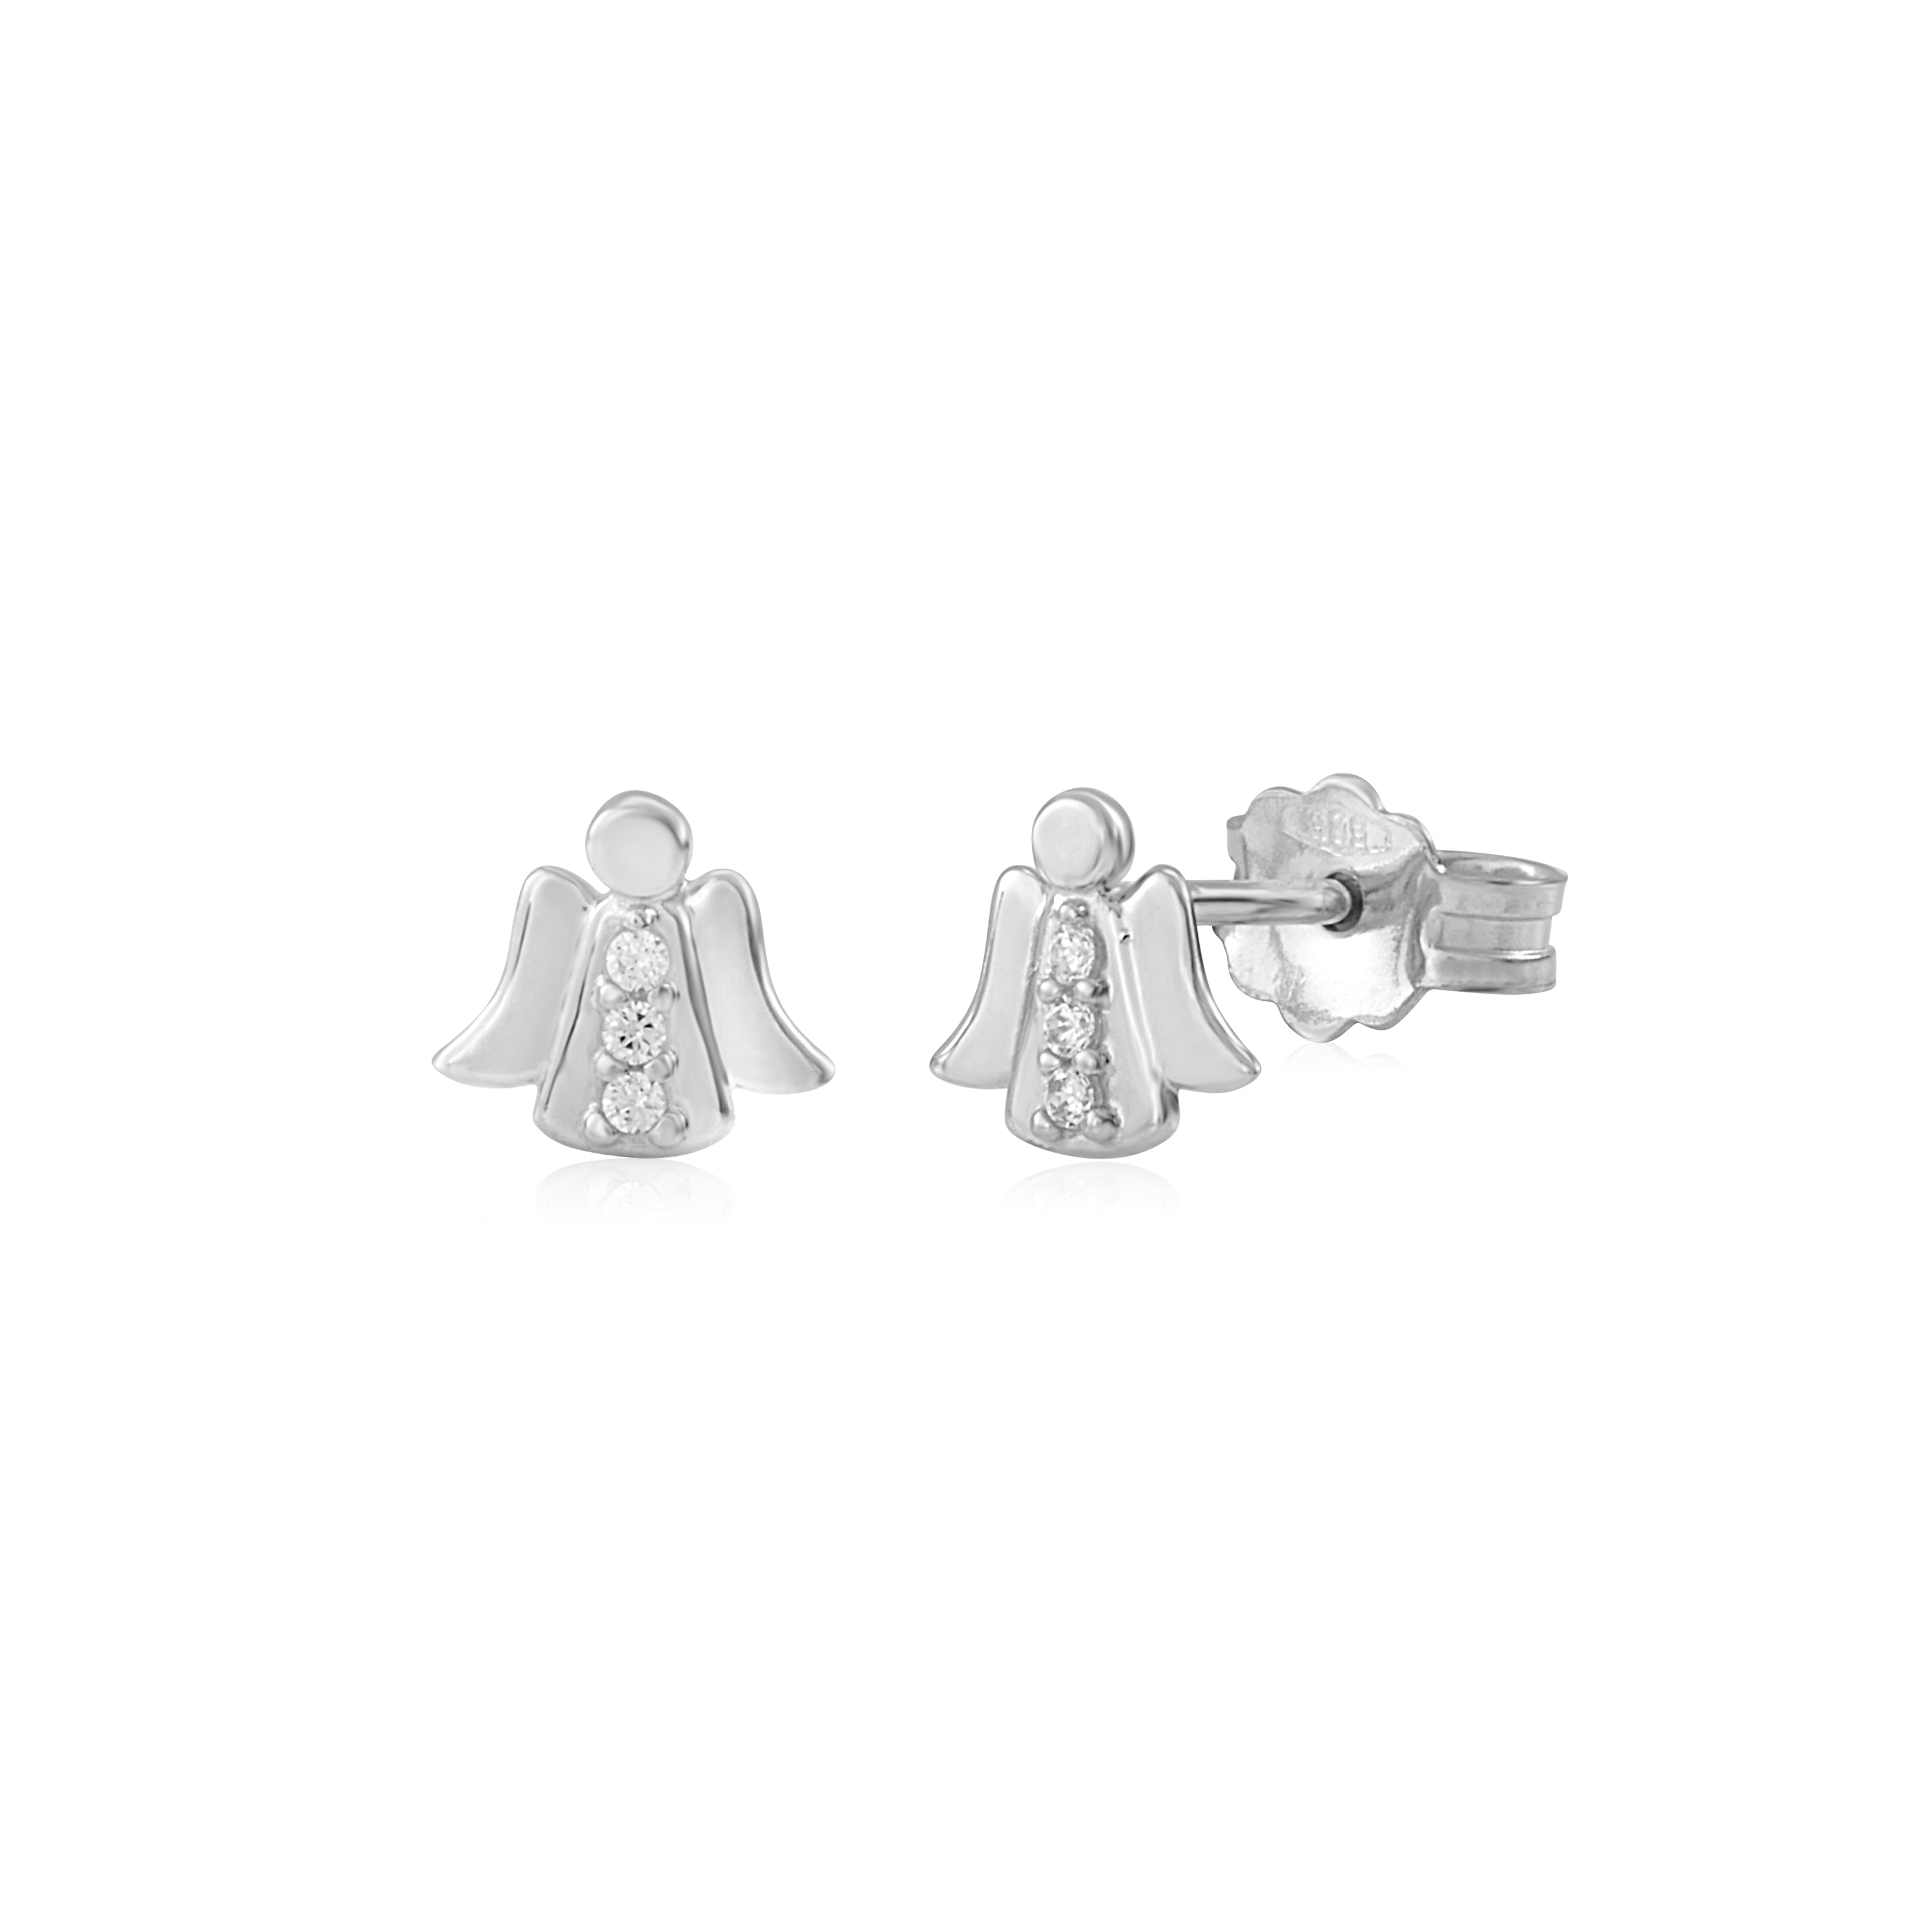 UNICORNJ 14K Yellow and White Gold Children's Kids Guardian Angel Post Earrings with CZ's Italy